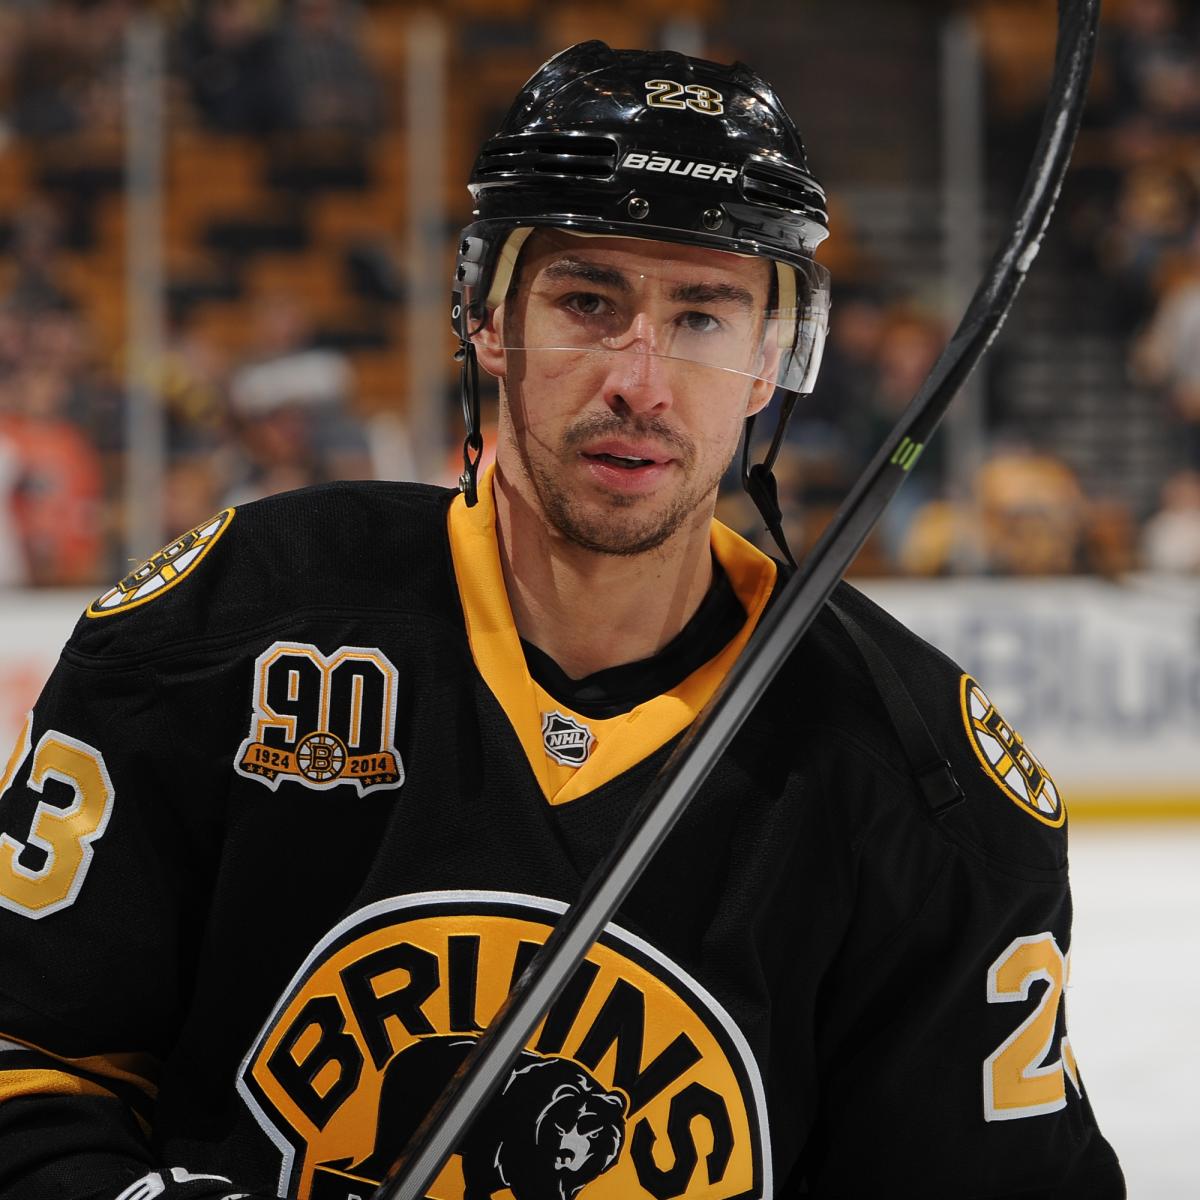 Will the Bruins take advantage of the buyout window to start their